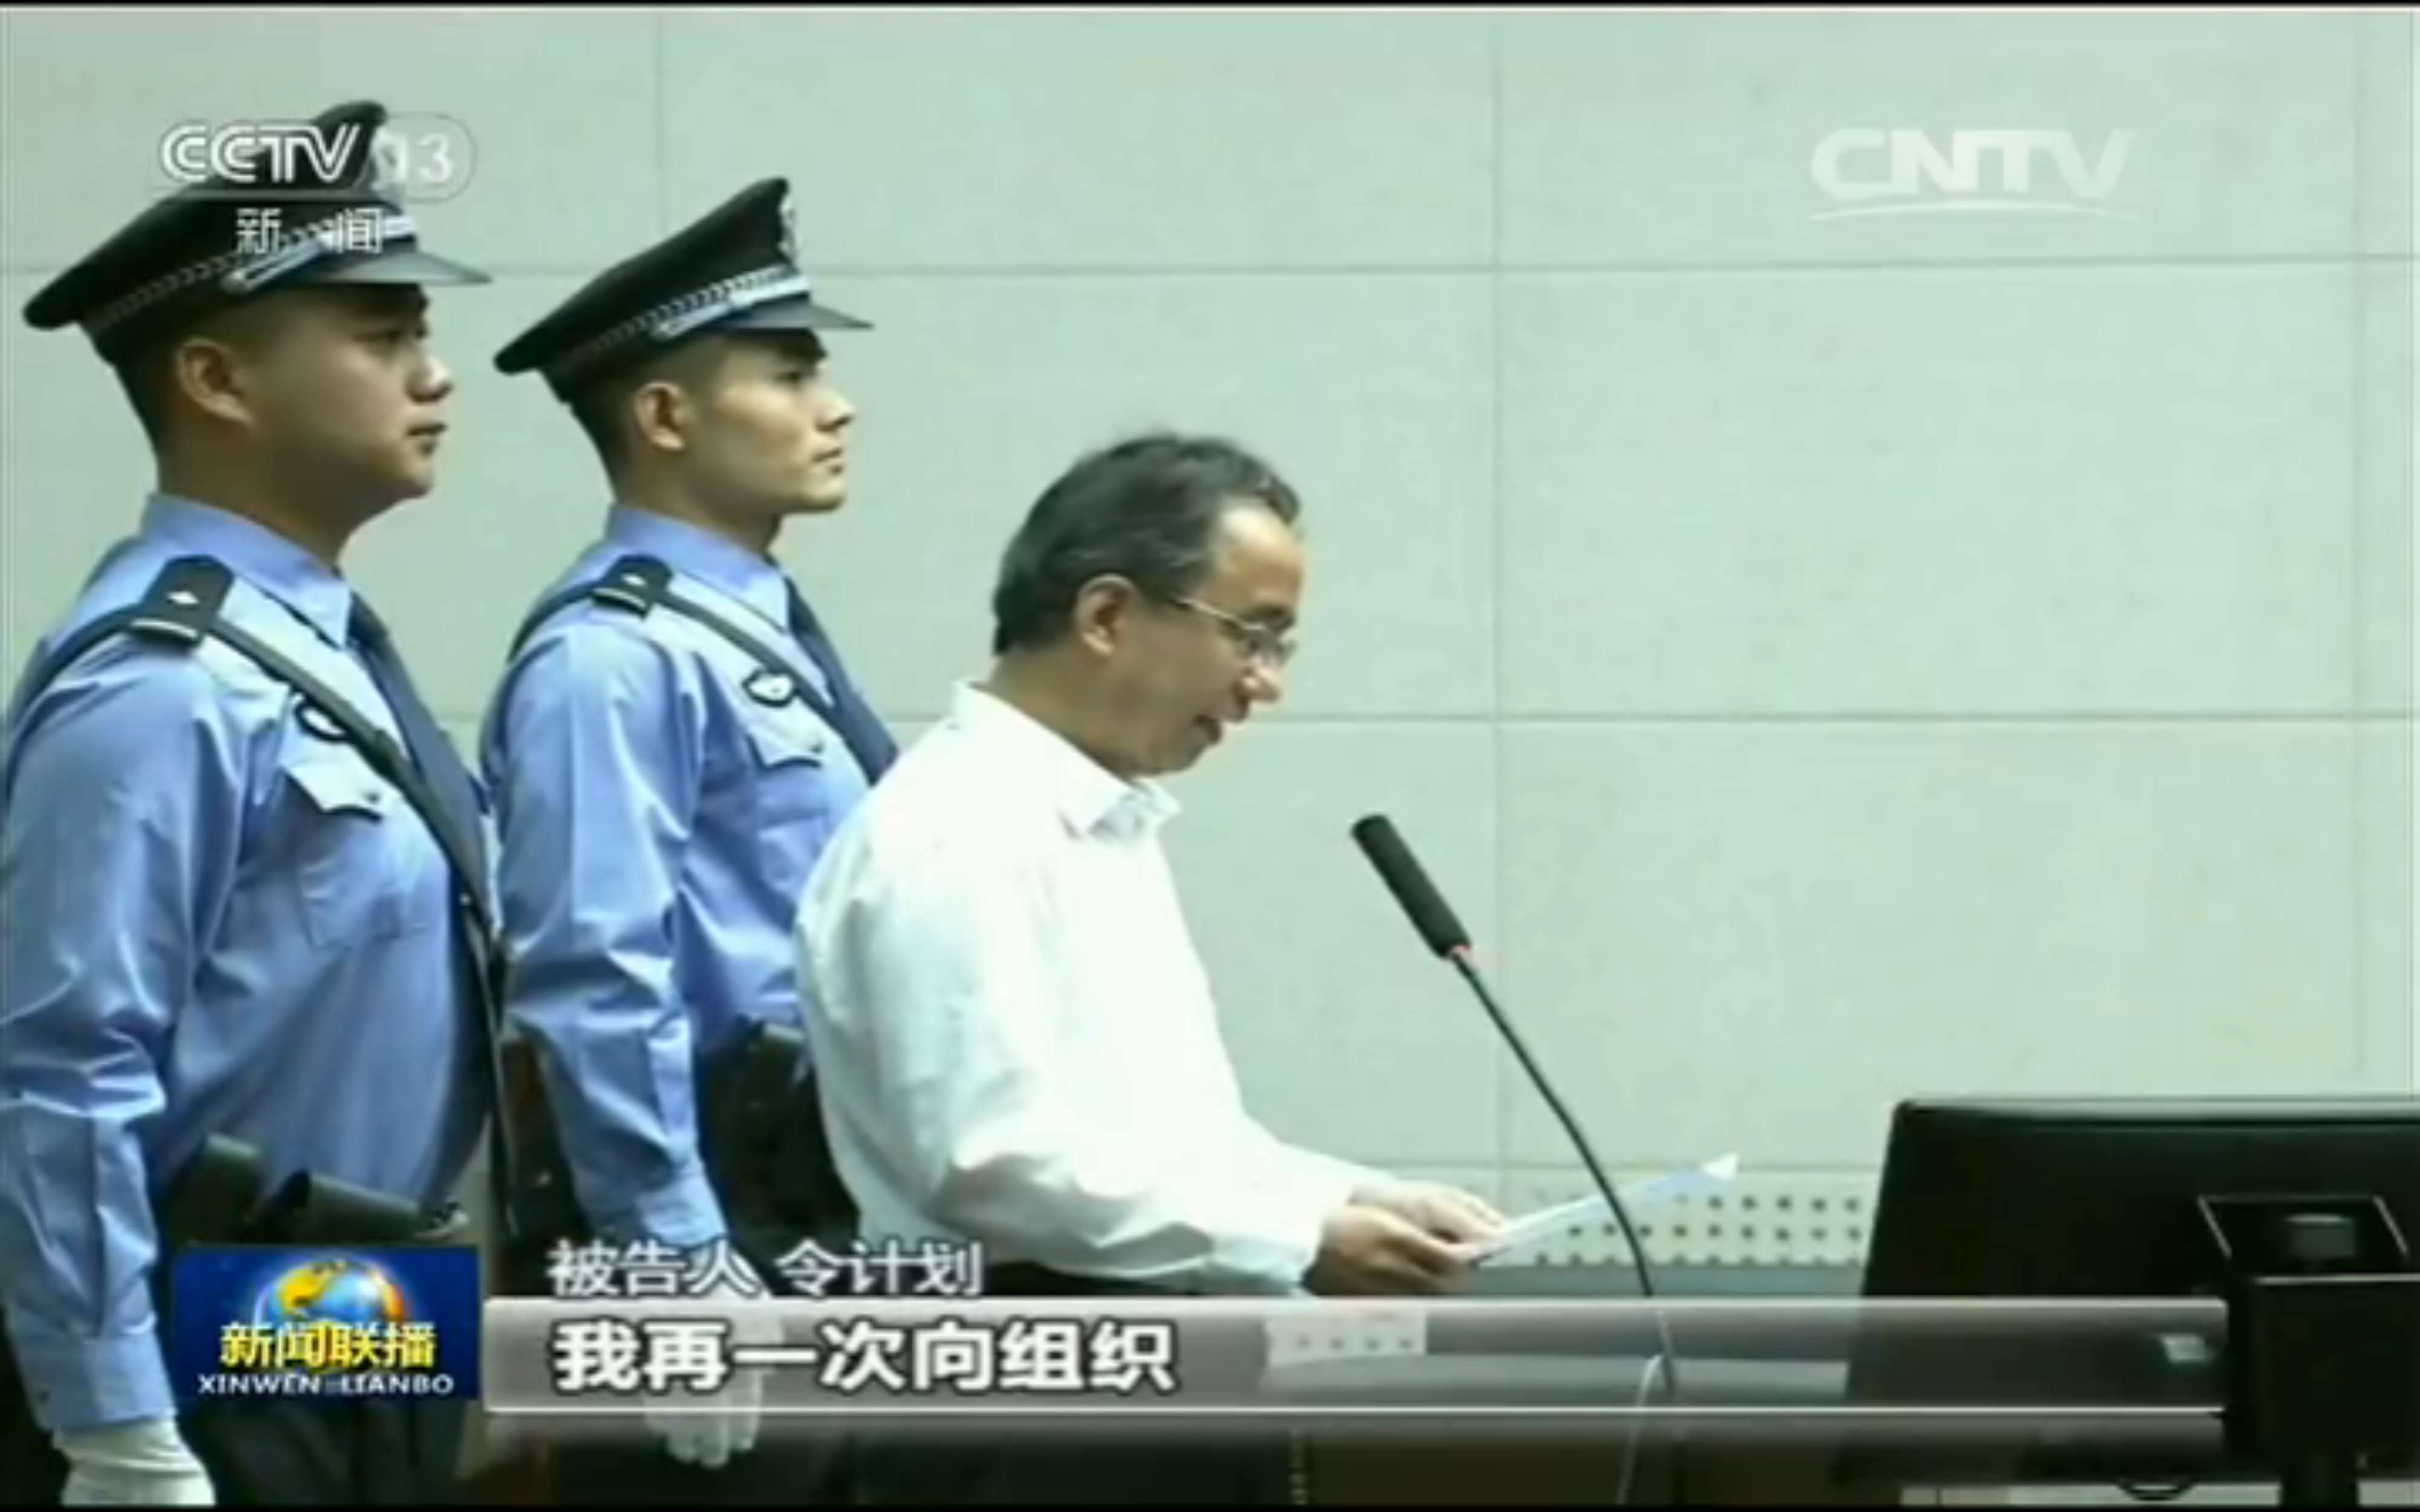 Ling Jihua reads his guilty plea in court. Photo: CCTV